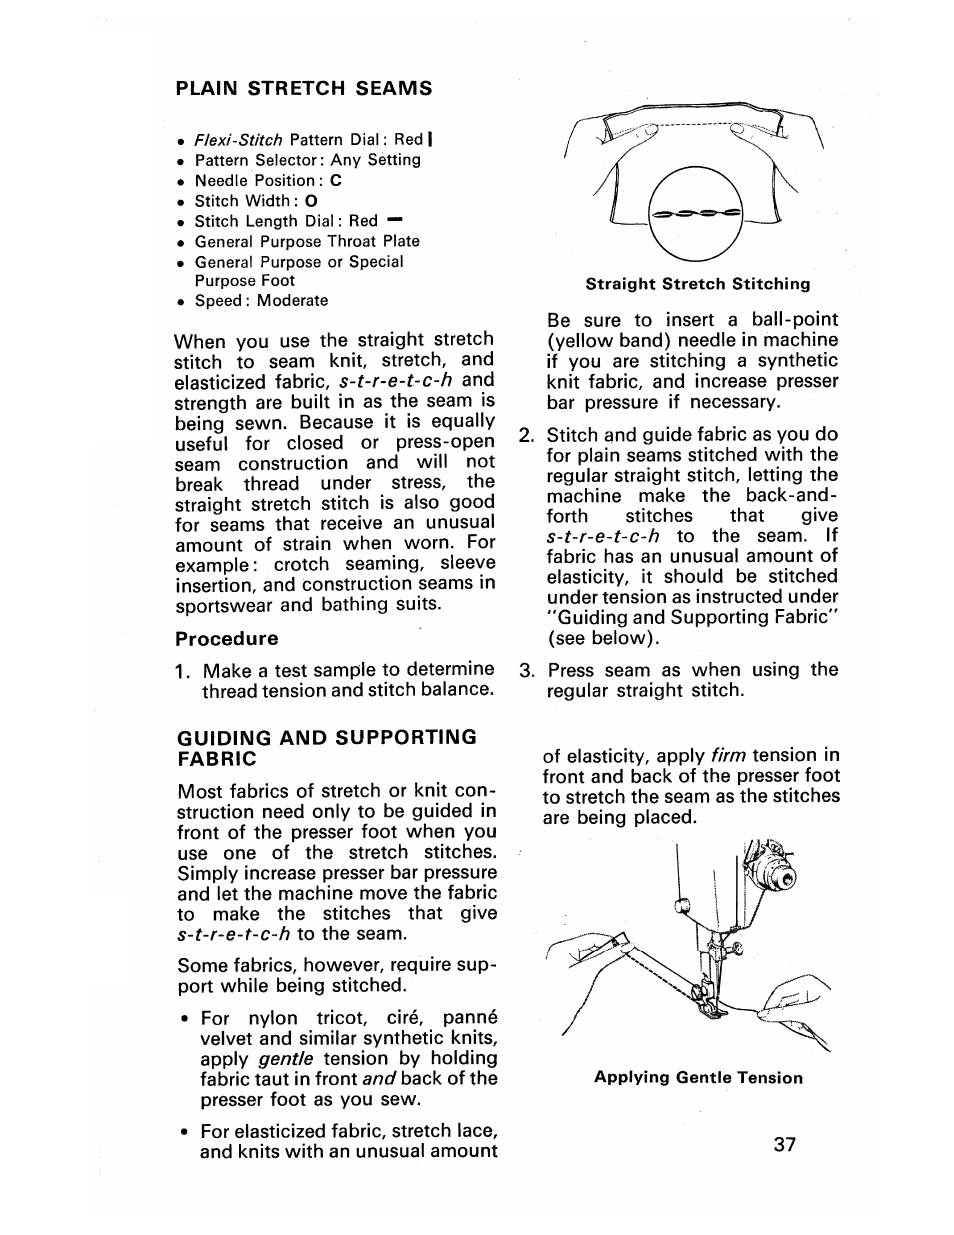 Procedure, Guiding and supporting fabric | SINGER 413 User Manual | Page 39 / 64